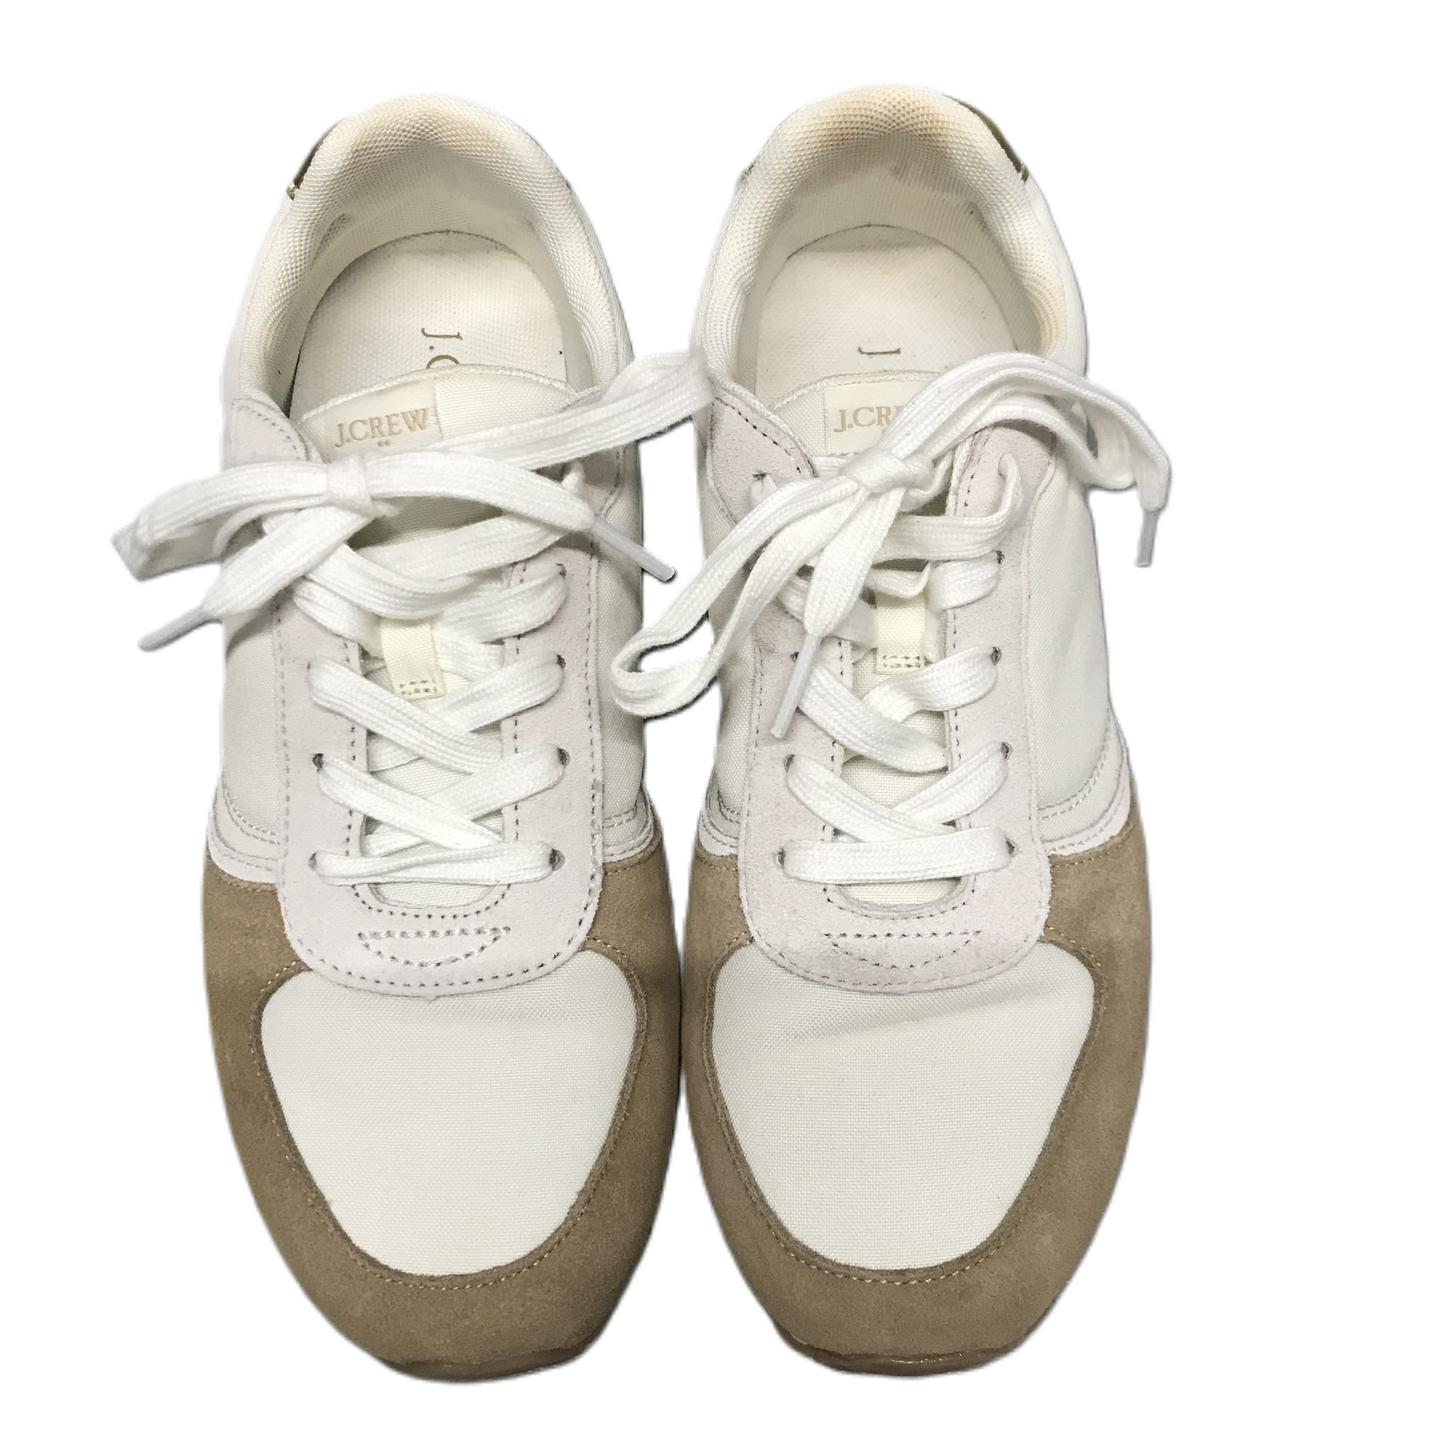 Gold Shoes Sneakers By J. Crew, Size: 8